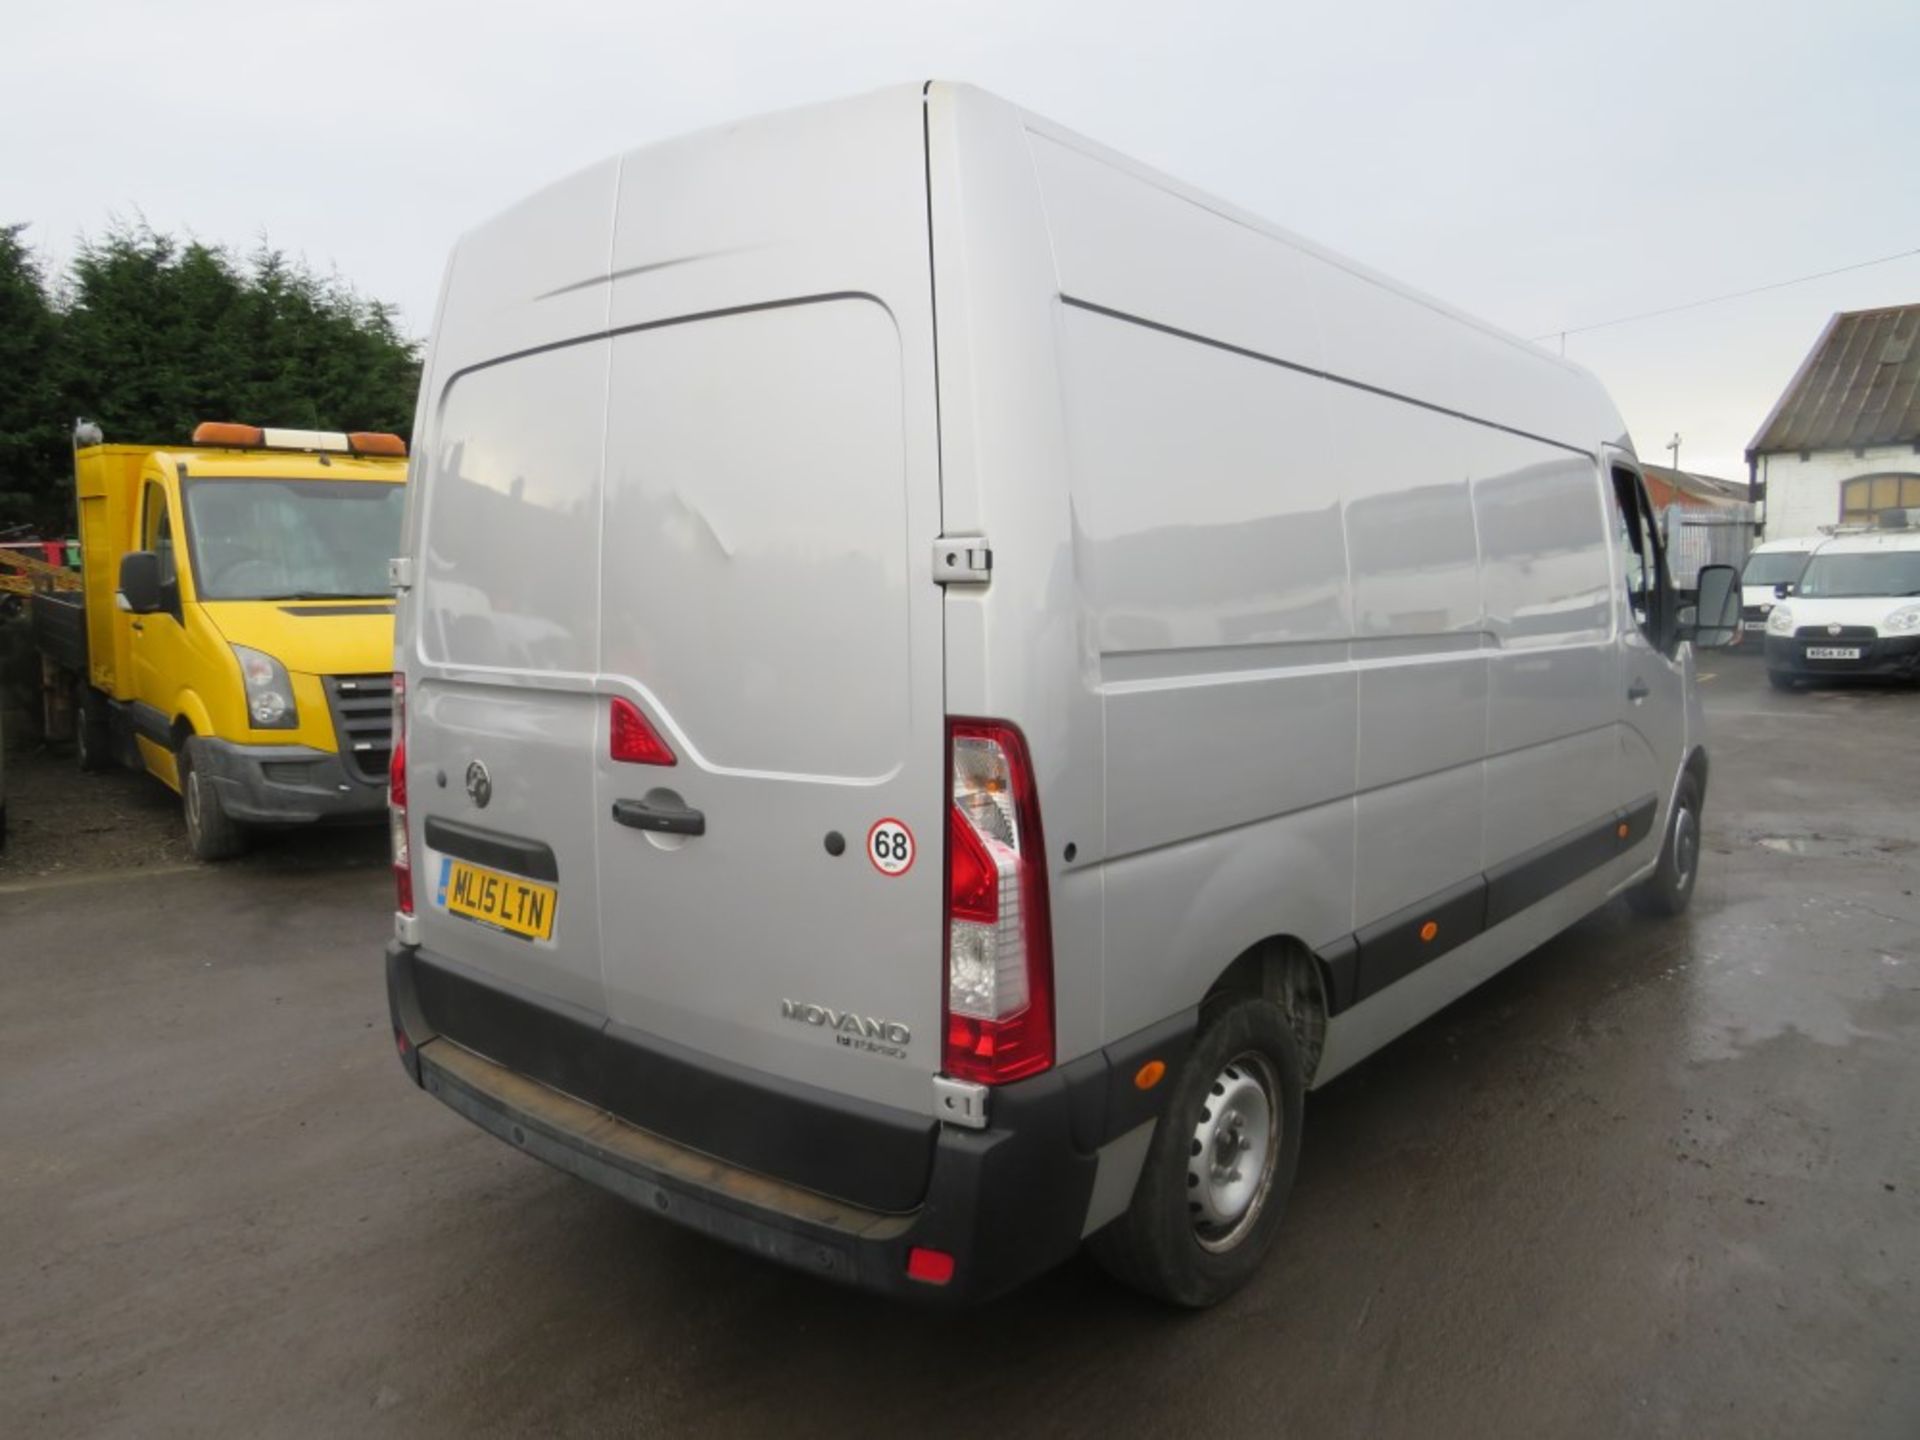 15 reg VAUXHALL MOVANO F3500 CDTI, 1ST REG 05/15, TEST 05/20, 106558M WARRANTED, V5 HERE, 1 OWNER - Image 4 of 6